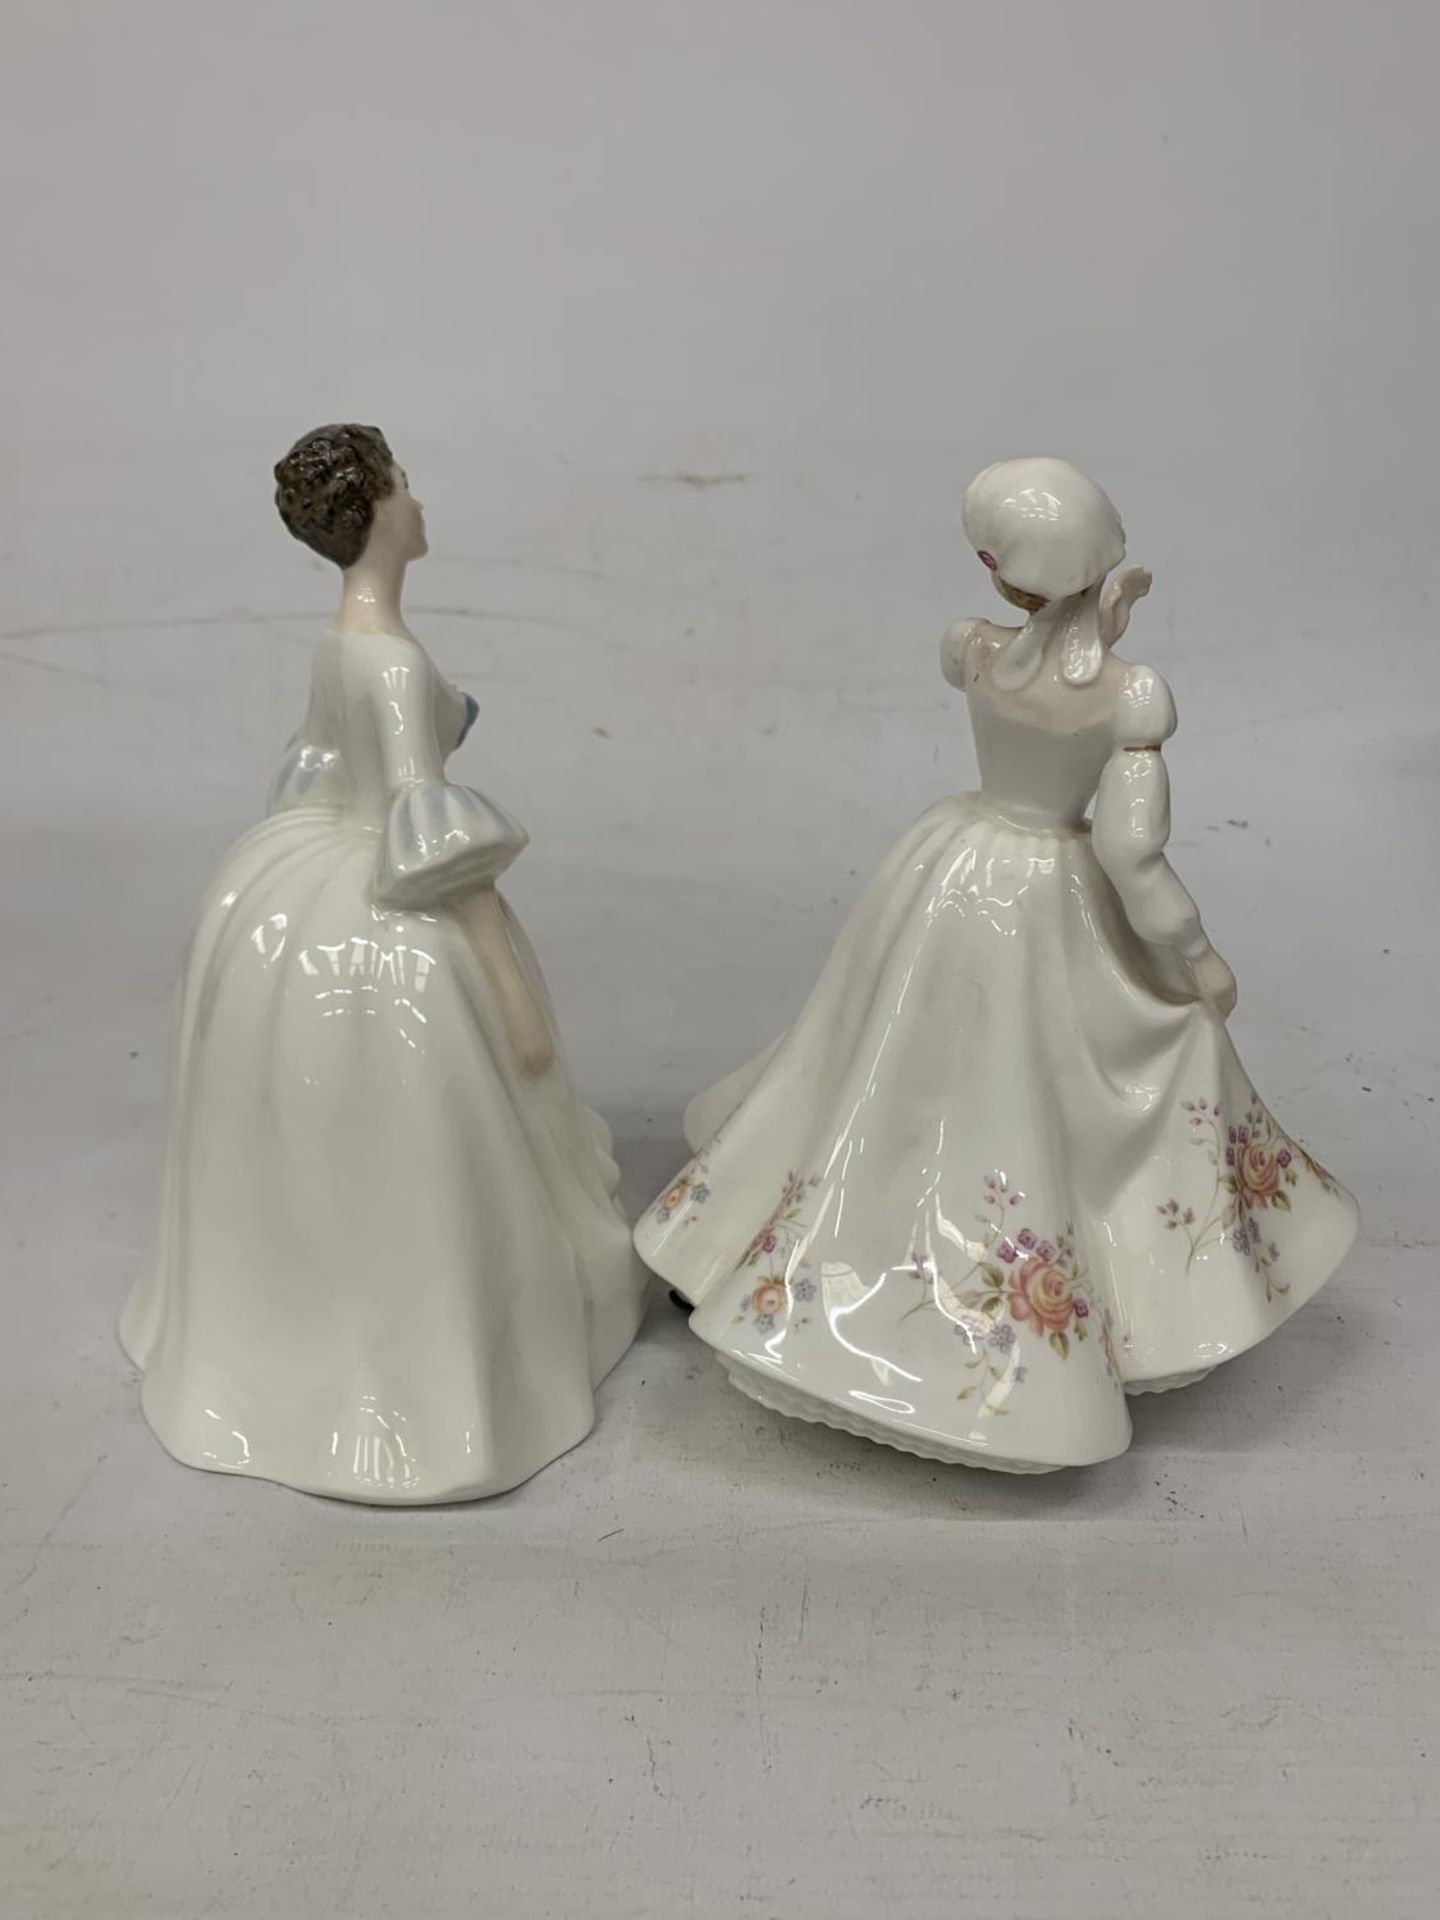 TWO ROYAL DOULTON FIGURES "ROSEMARY" HN 3143 AND "KELLY" HN 3222 - Bild 2 aus 4